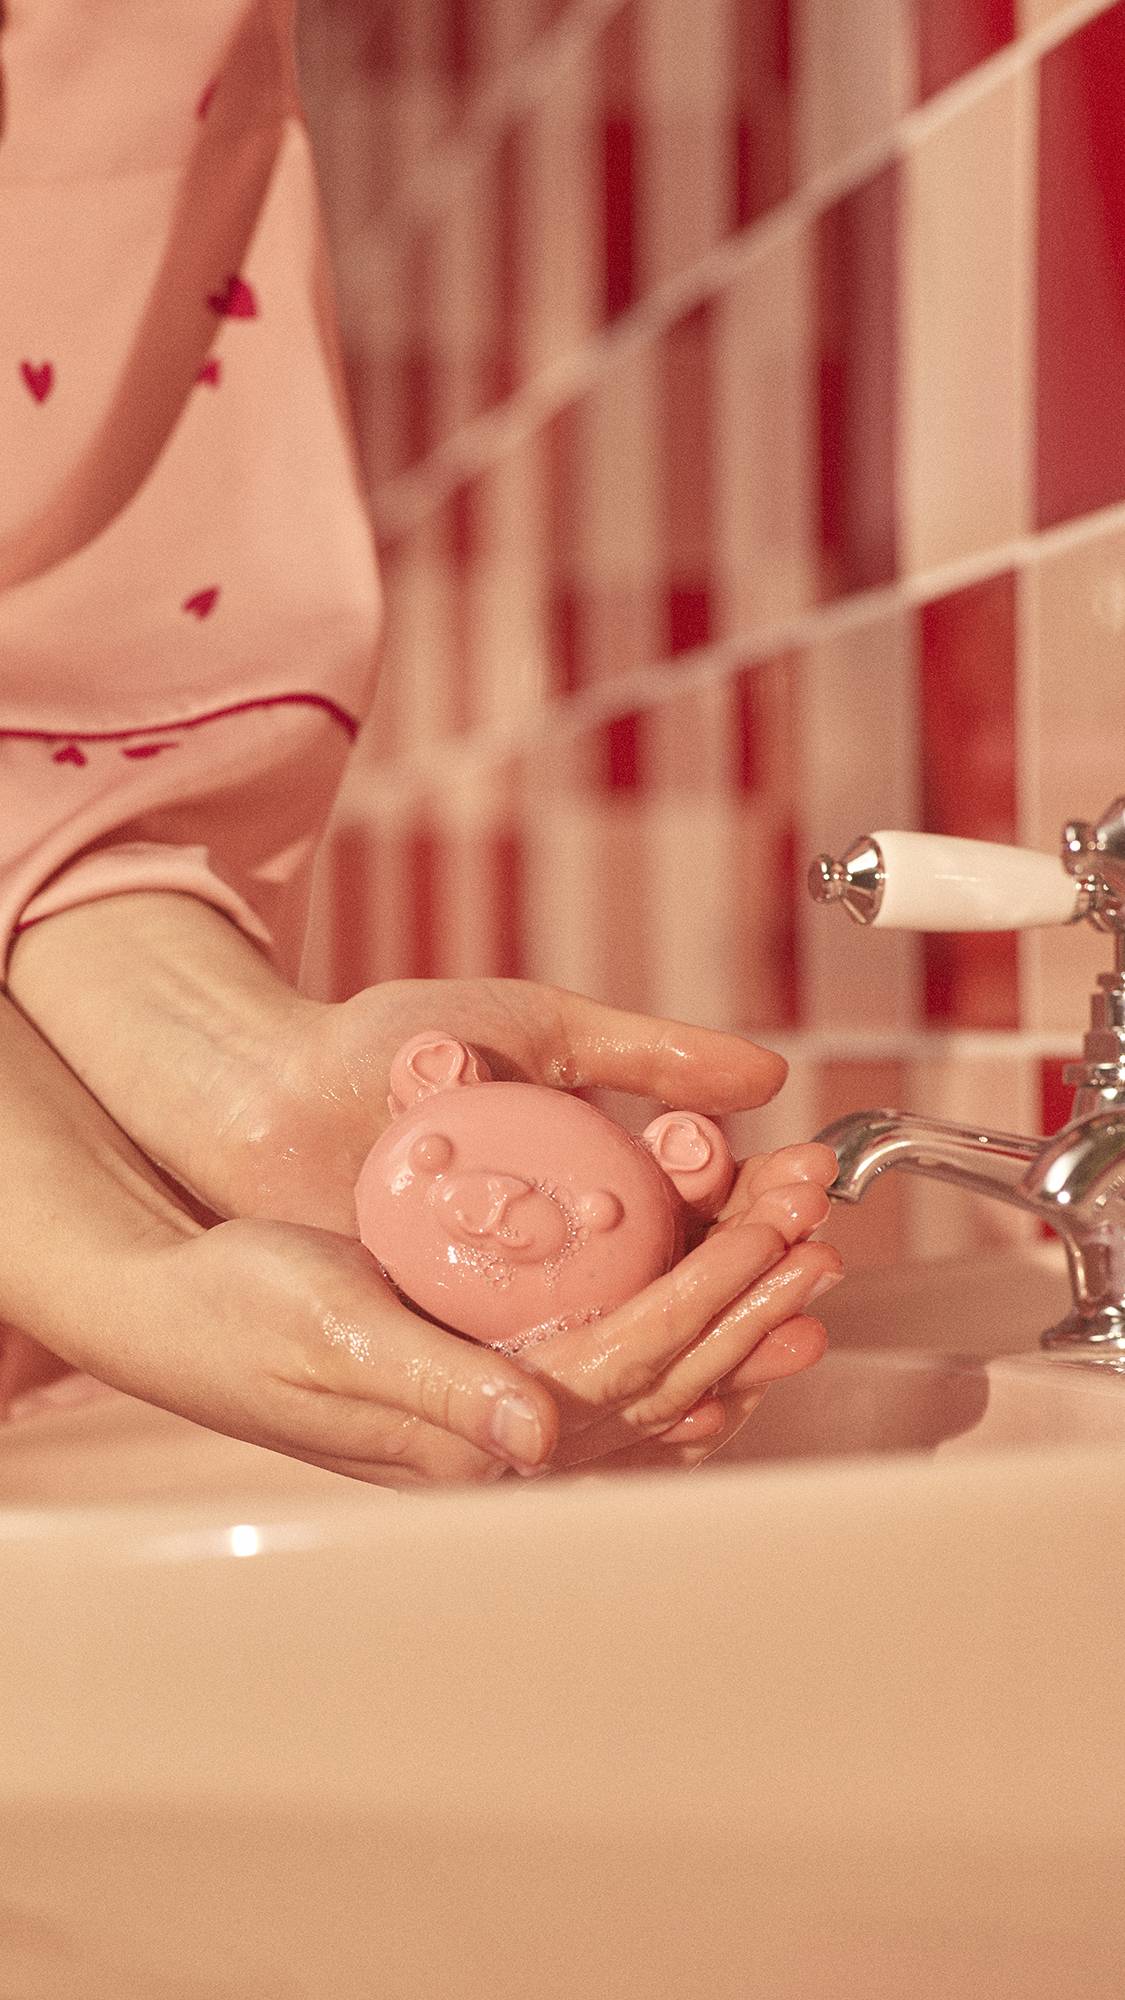 Image shows a close-up of the model's hands gently holding the My Li'l Chia Bear, dotted with soap suds, above a sink.